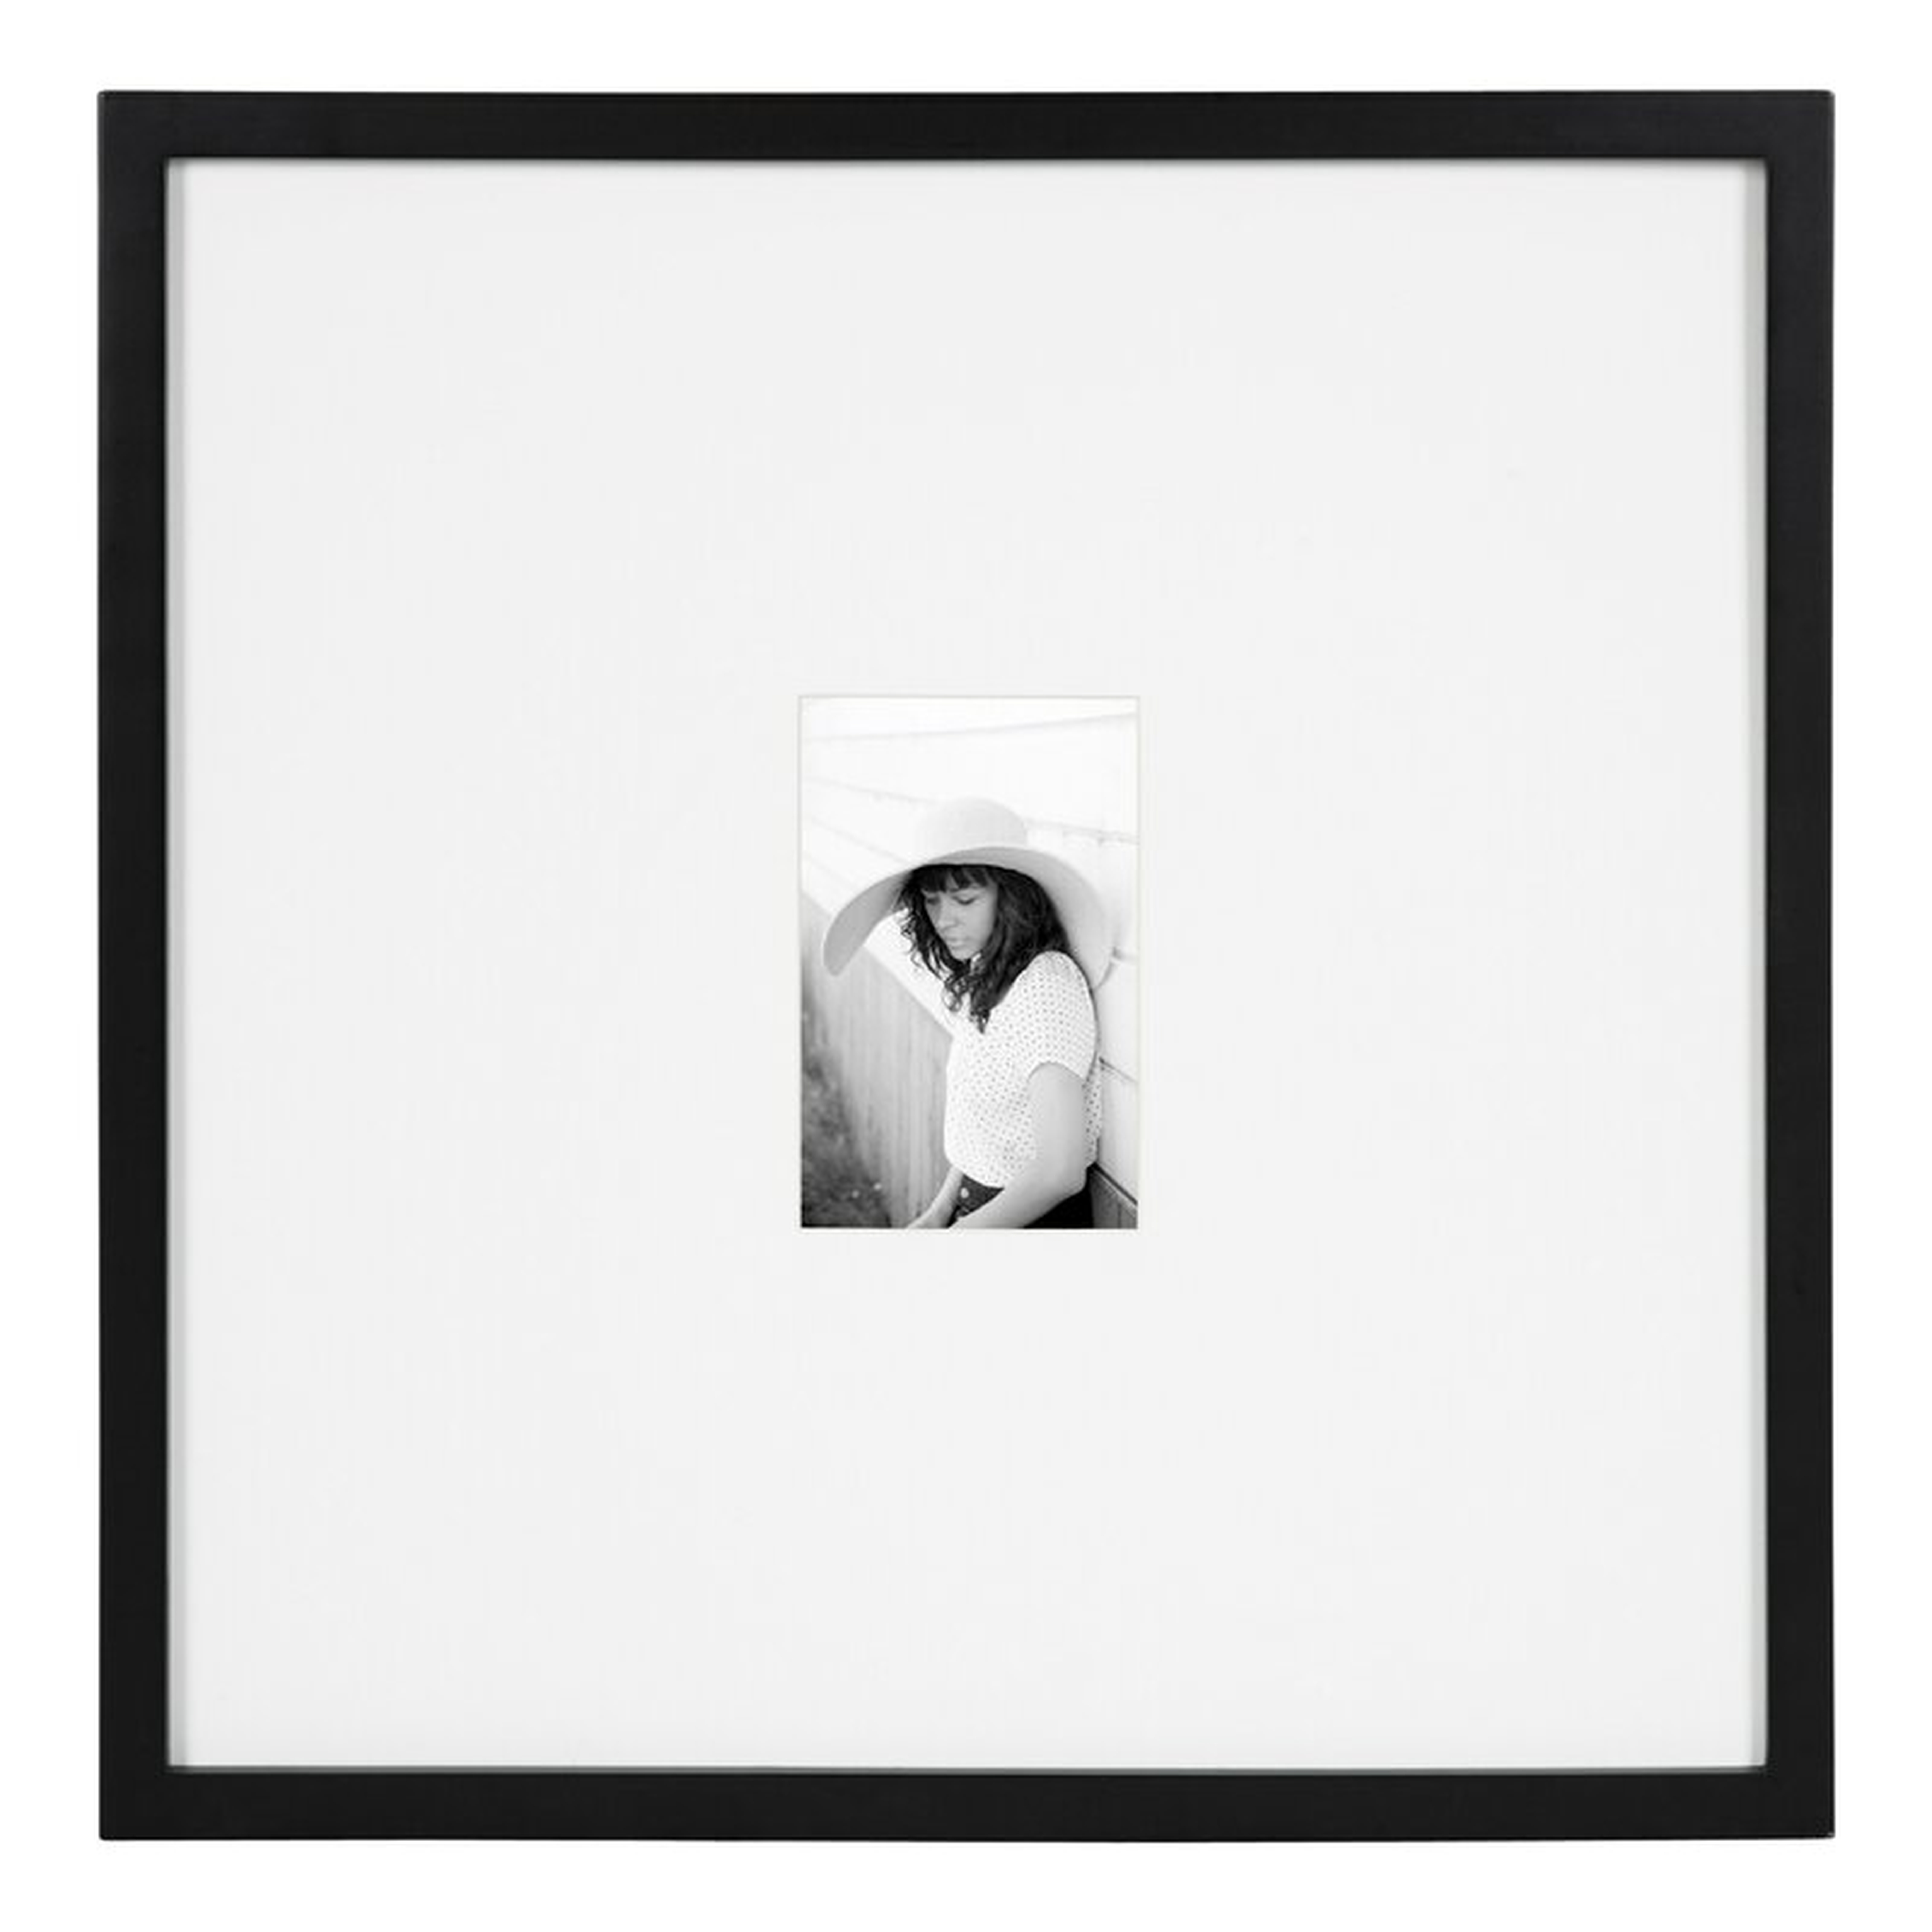 Comerfo Gallery Picture Frame - Wayfair